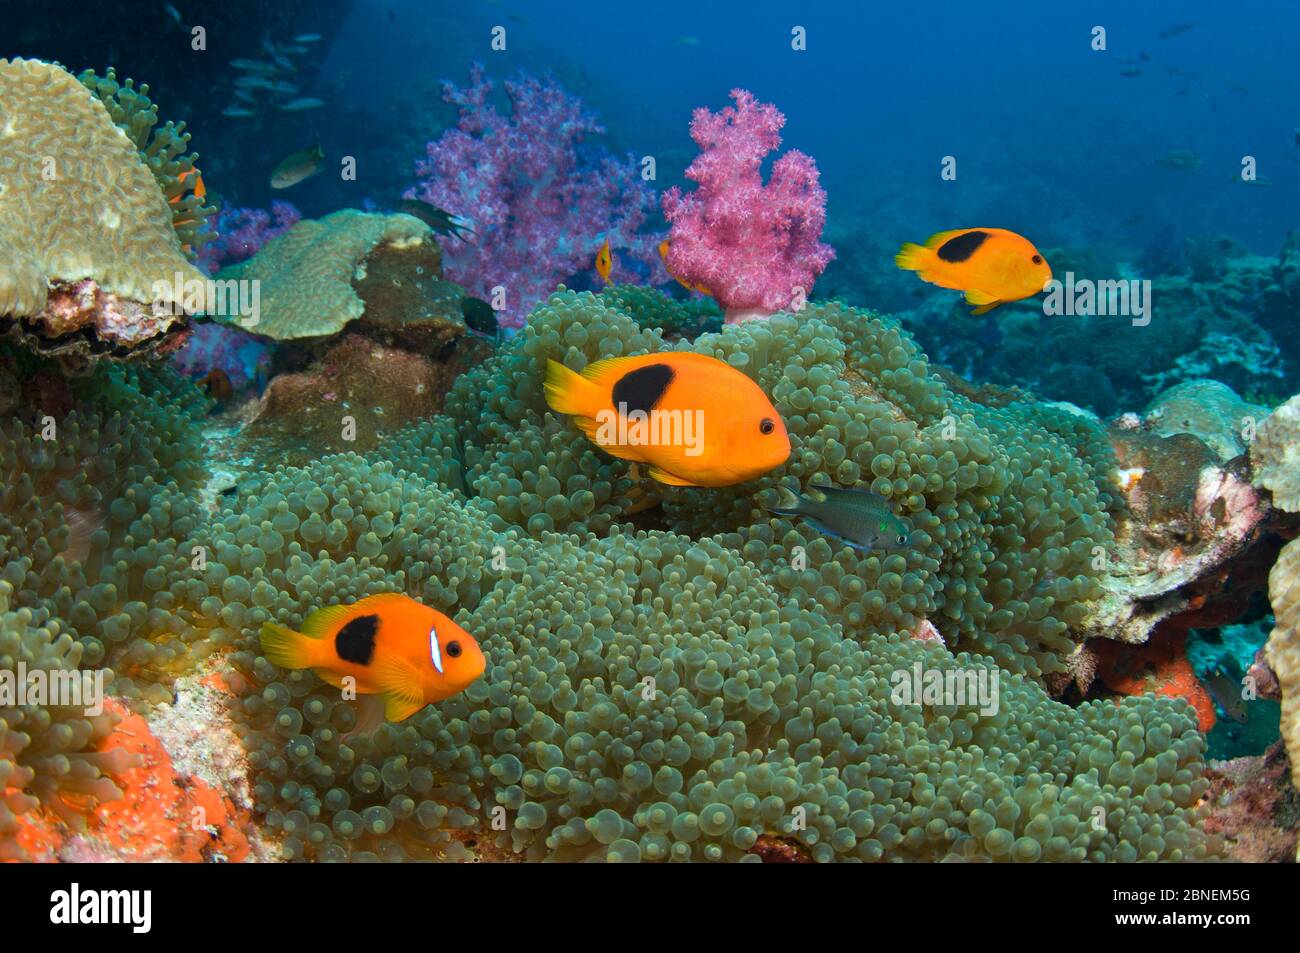 Andaman anemone fishes (Amphiprion ephippium) hovering above a sea anemone on a coral reef in Thailand.  Richelieu Rock, Andaman Sea, Indian Ocean. Stock Photo